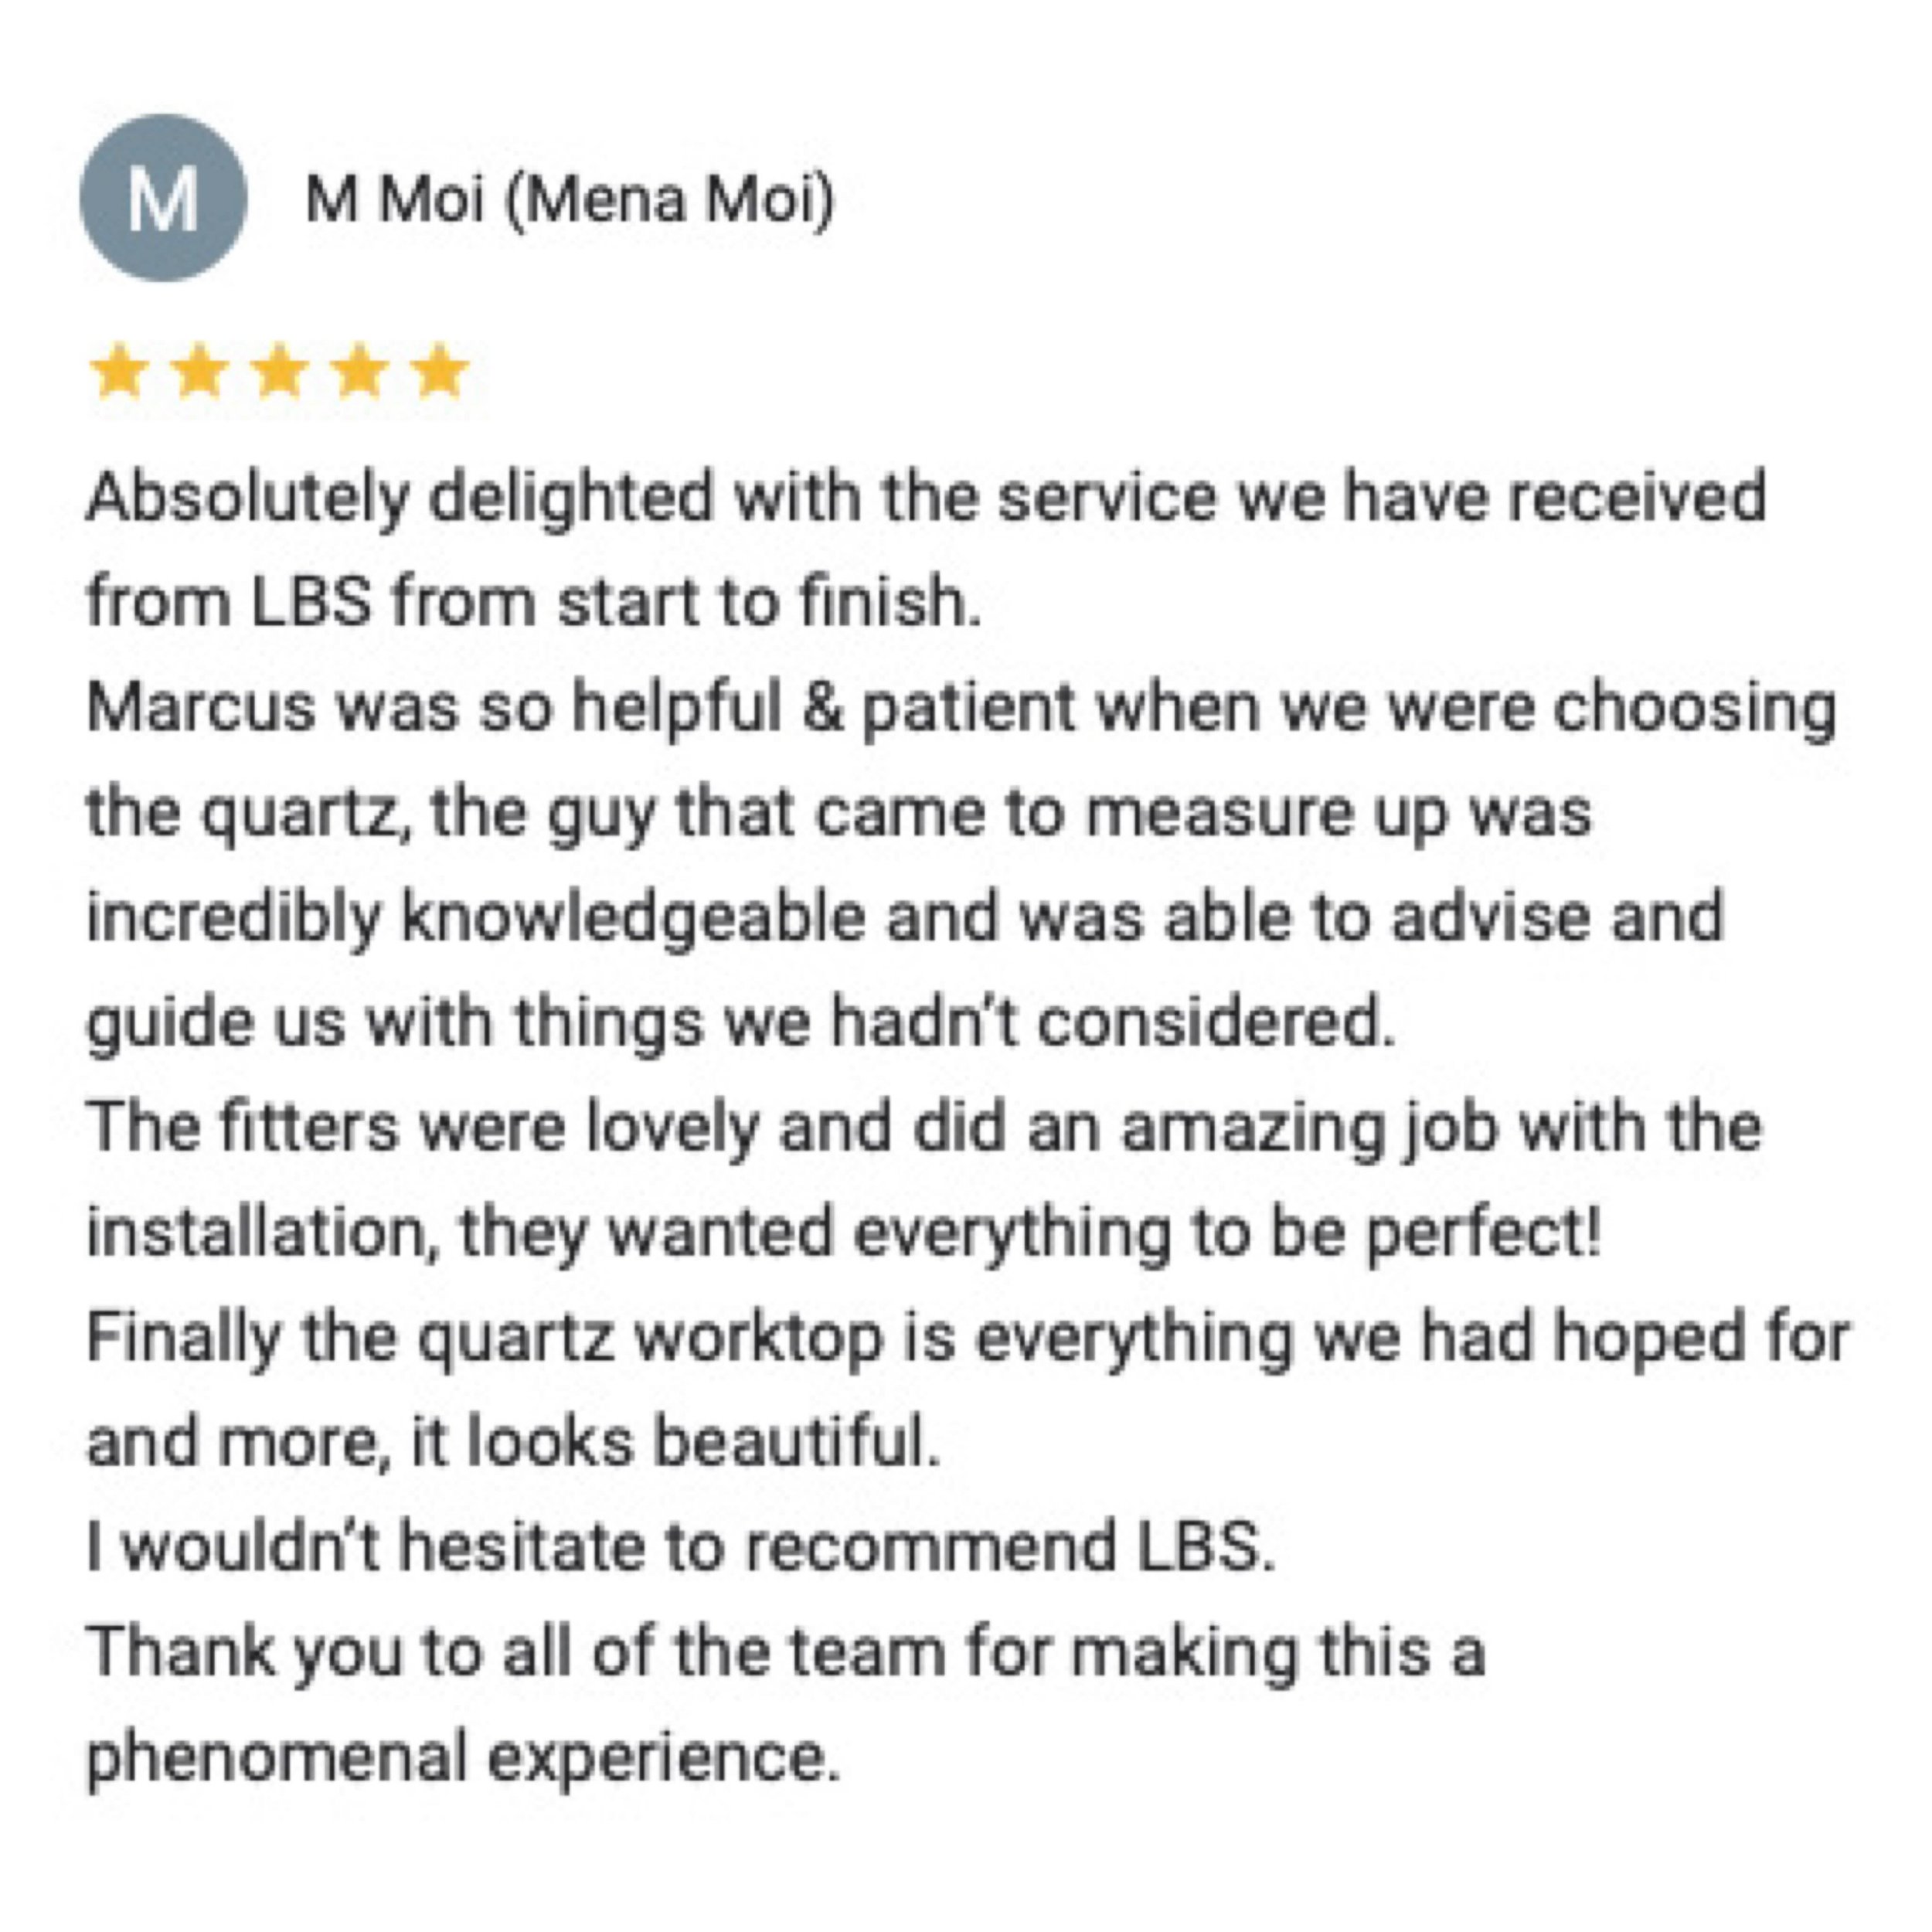 Thank you Mena for your fabulous ⭐️⭐️⭐️⭐️⭐️ Review! Wishing you lots of happiness in your gorgeous new kitchen🤩

Quartz, Granite, Marble &amp; Ceramic Worktops &amp; Surfaces professionally fabricated by @lbsstone since 2000.
.
.
.
.
#google #design